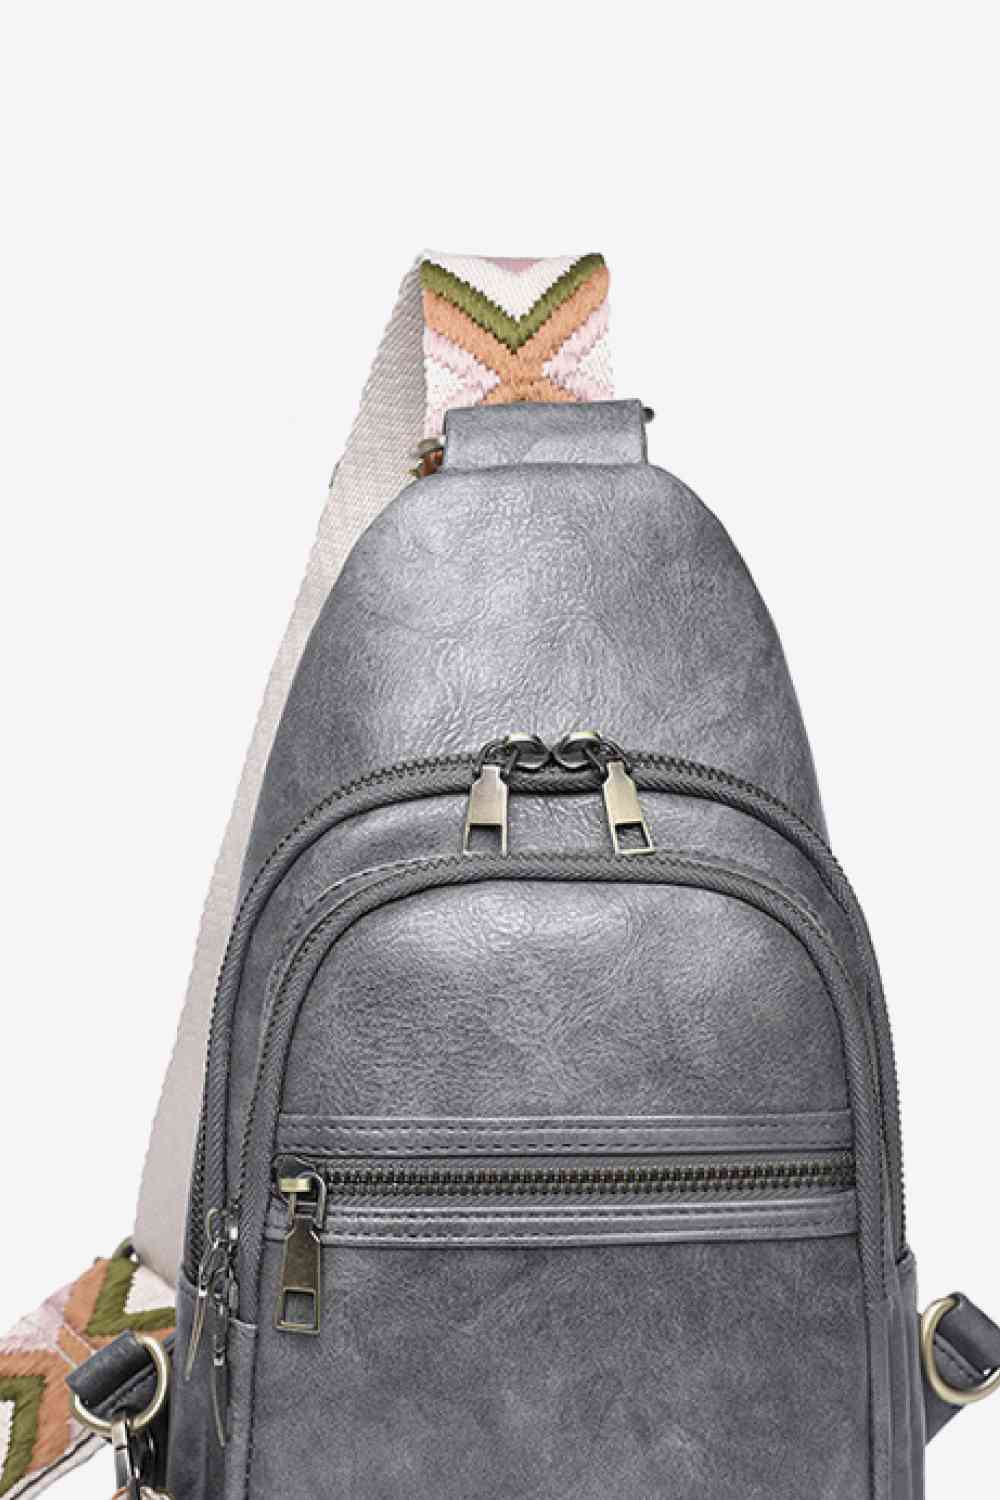 It's Your Time Vegan Leather Sling Bag